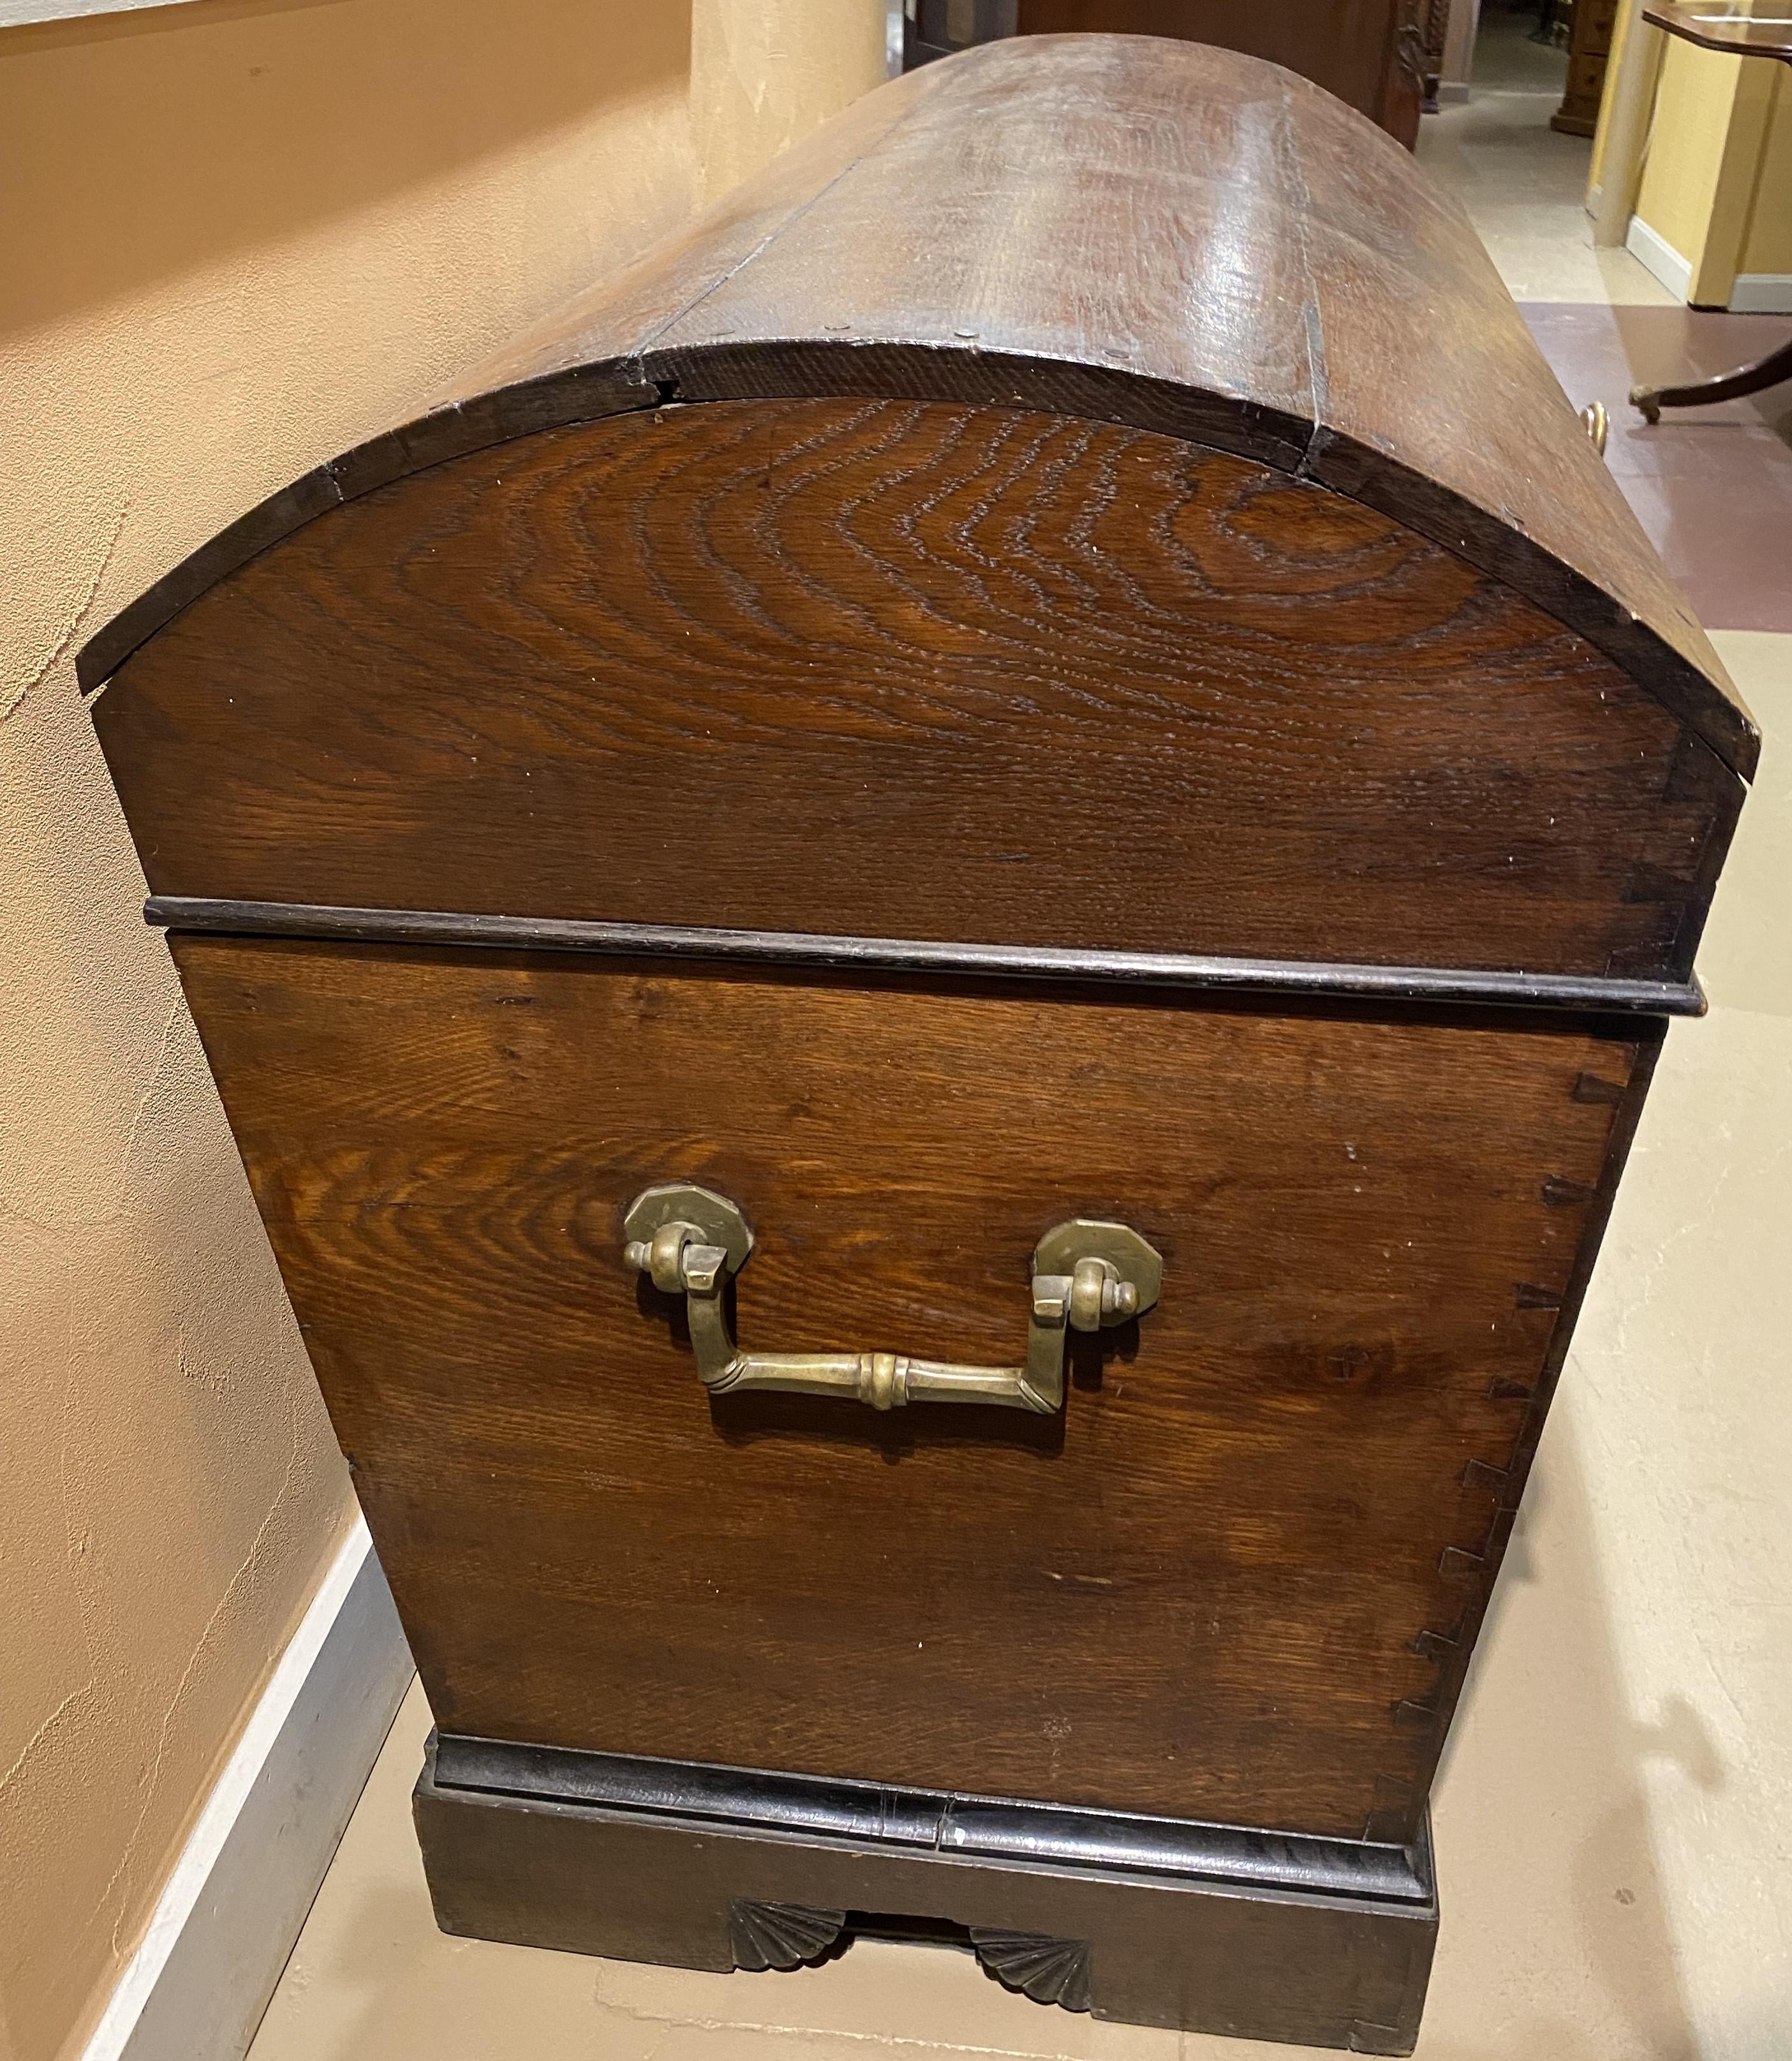 18th/19th c European Oak Dome Top Trunk with Carved Shell Decoration In Good Condition For Sale In Milford, NH